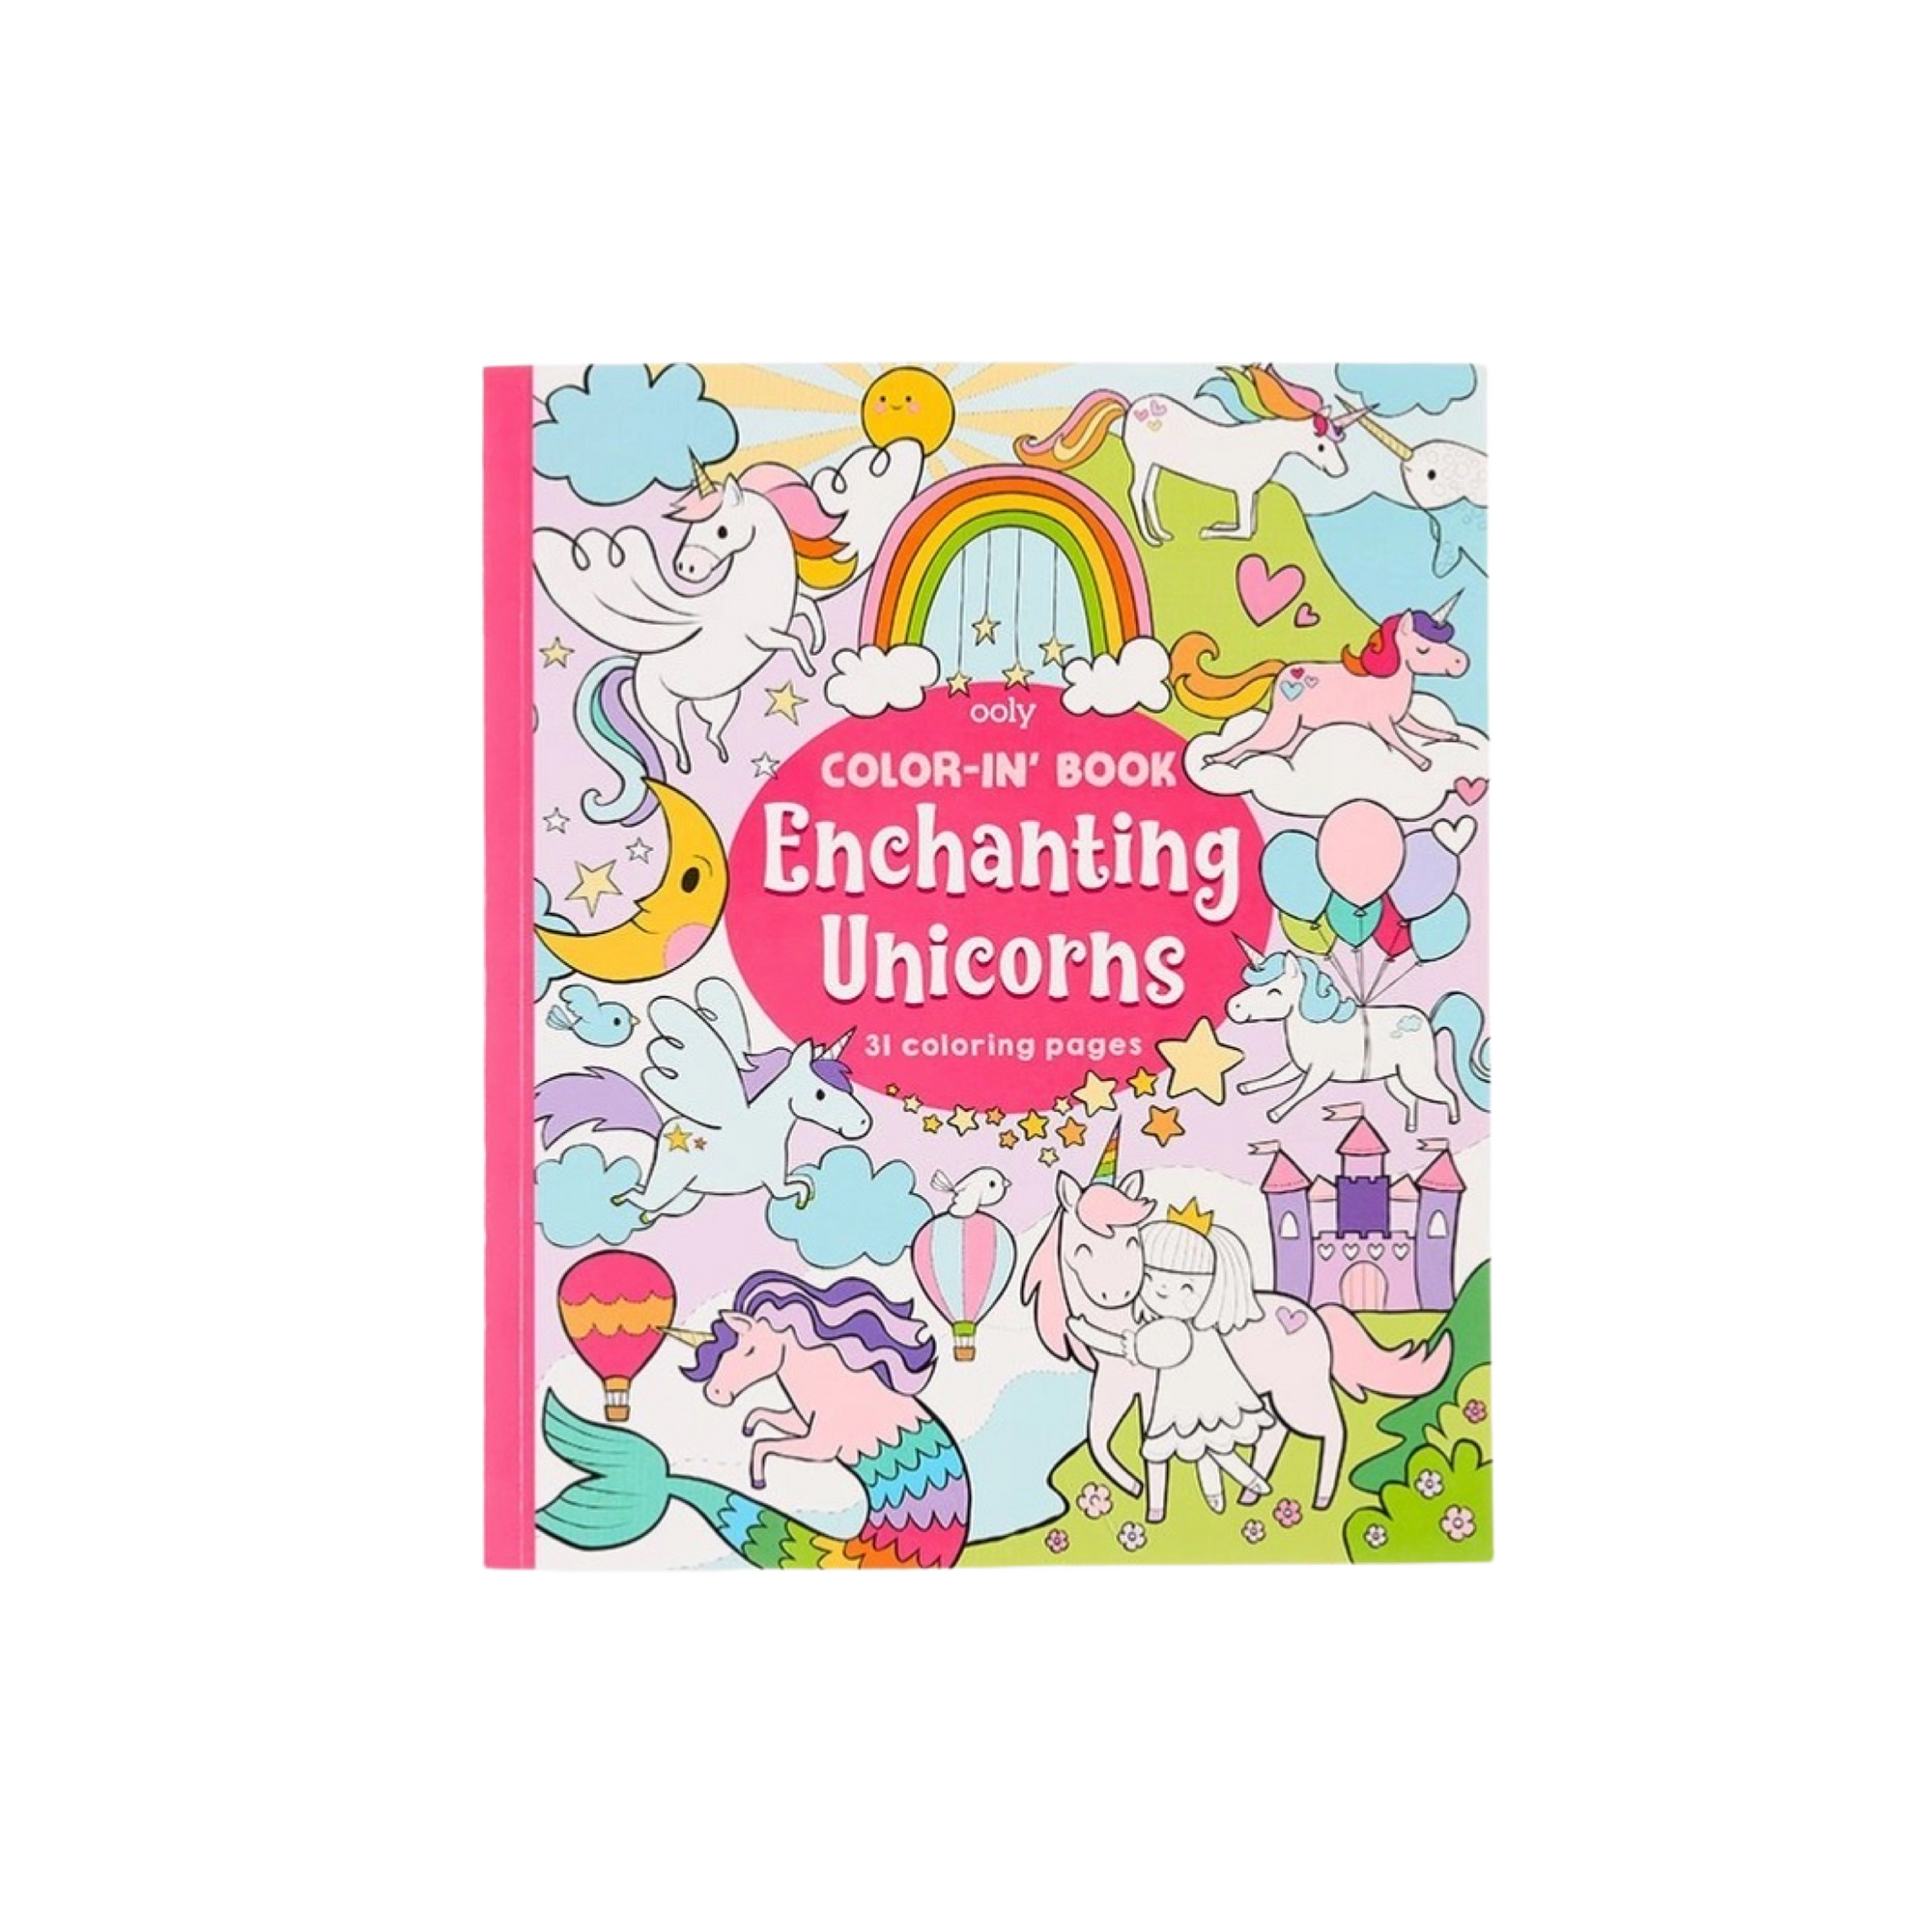 Enchanting Unicorns Color-In Book